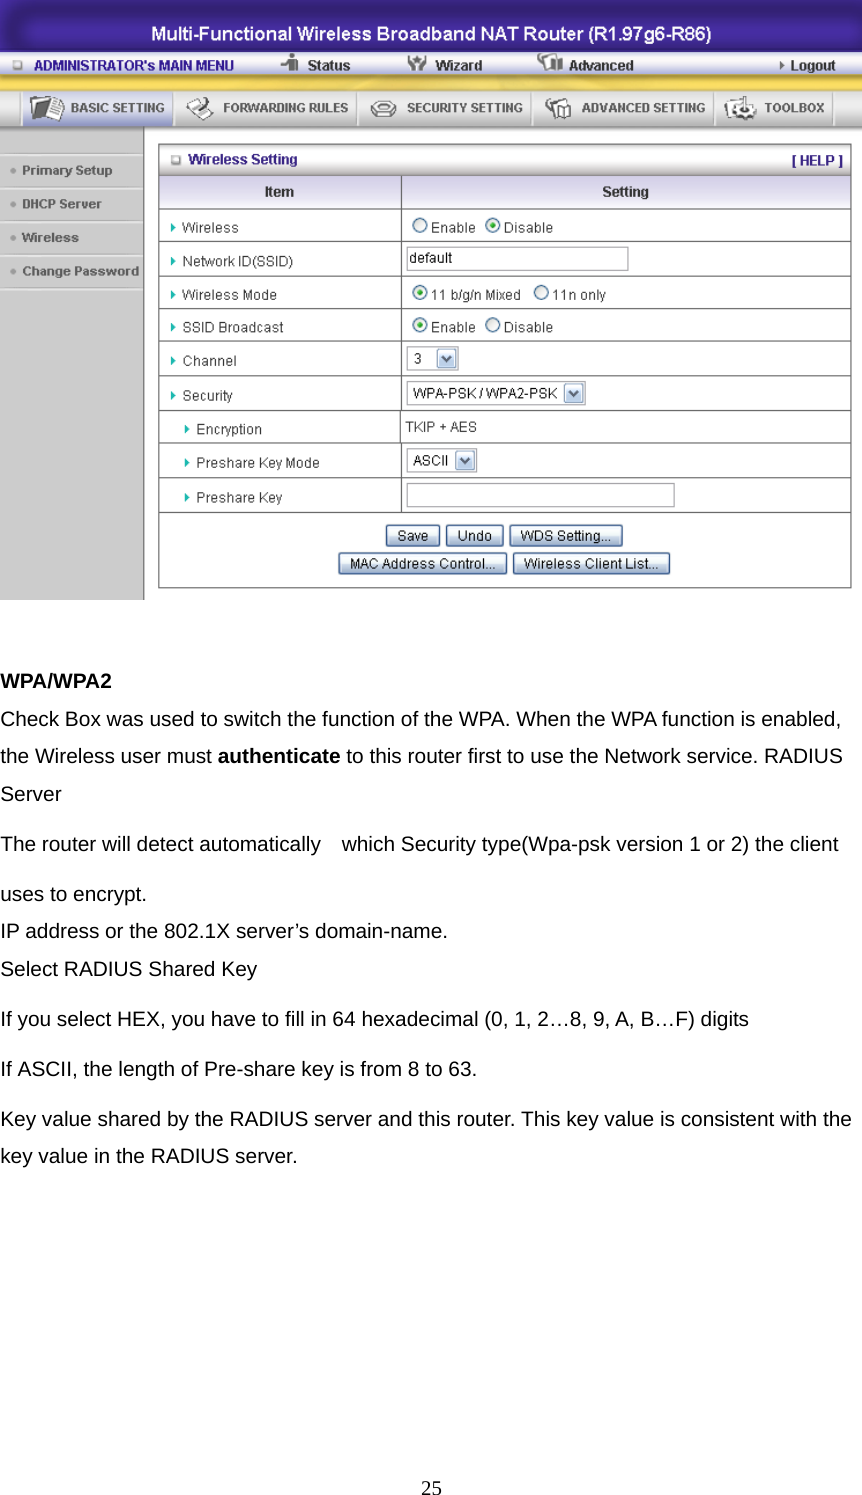   WPA/WPA2 Check Box was used to switch the function of the WPA. When the WPA function is enabled, the Wireless user must authenticate to this router first to use the Network service. RADIUS Server The router will detect automatically    which Security type(Wpa-psk version 1 or 2) the client   uses to encrypt. IP address or the 802.1X server’s domain-name.   Select RADIUS Shared Key If you select HEX, you have to fill in 64 hexadecimal (0, 1, 2…8, 9, A, B…F) digits If ASCII, the length of Pre-share key is from 8 to 63. Key value shared by the RADIUS server and this router. This key value is consistent with the key value in the RADIUS server.       25